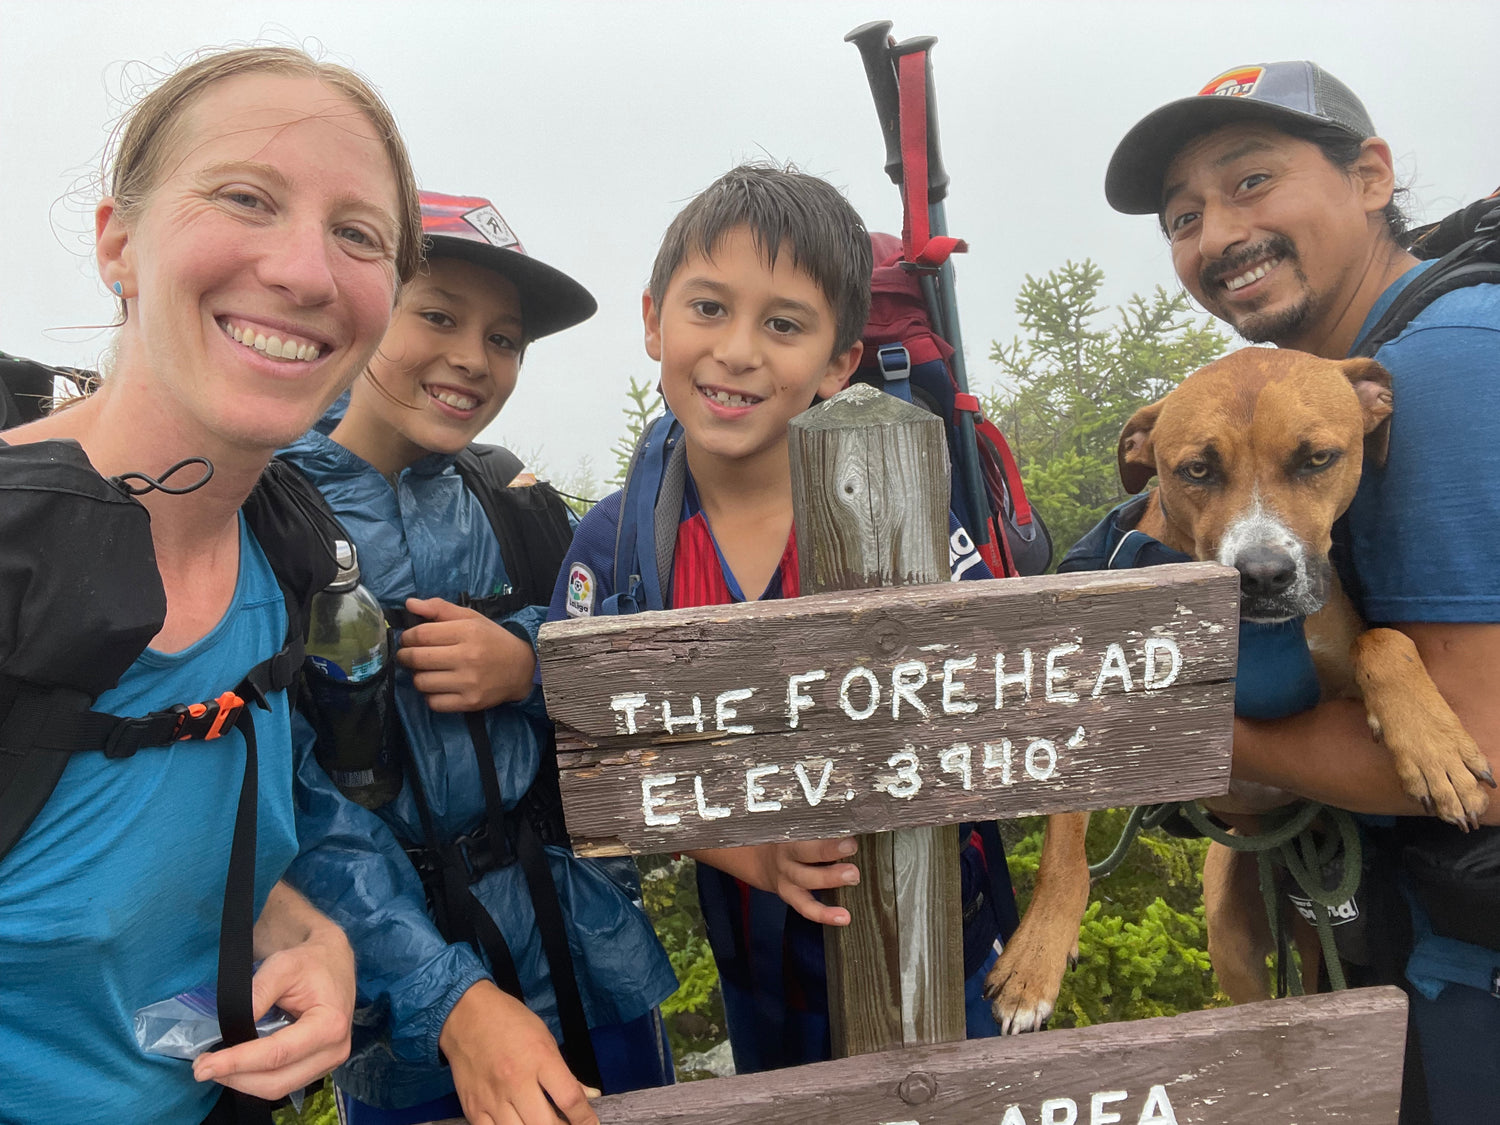 A Family Adventure: Thru-hiking the Long Trail with kids, a dog, and no backpacking experience By Allison Korn and Marco Yunga Tacuri